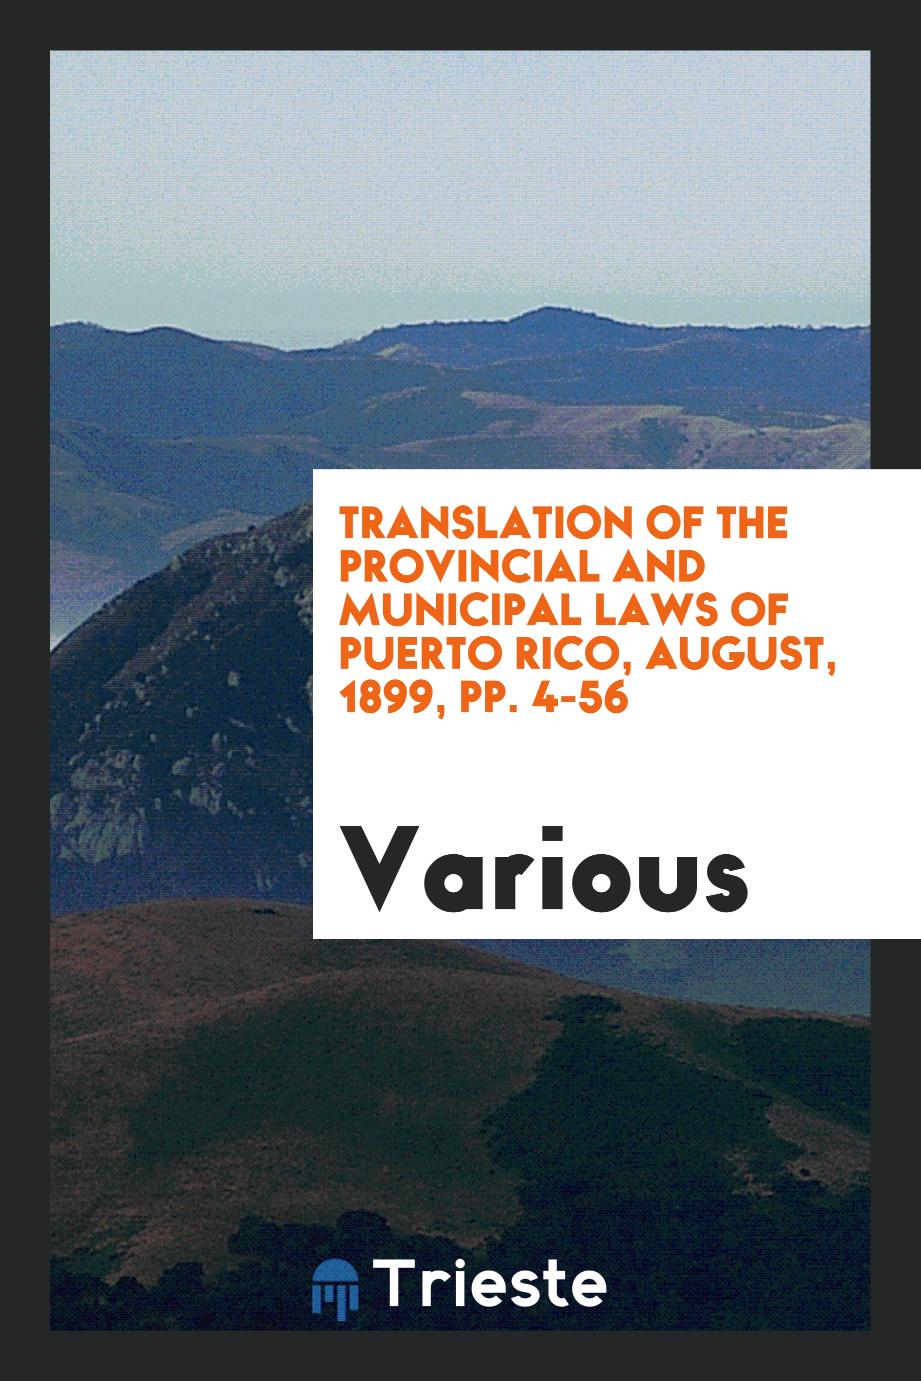 Translation of the Provincial and Municipal Laws of Puerto Rico, august, 1899, pp. 4-56